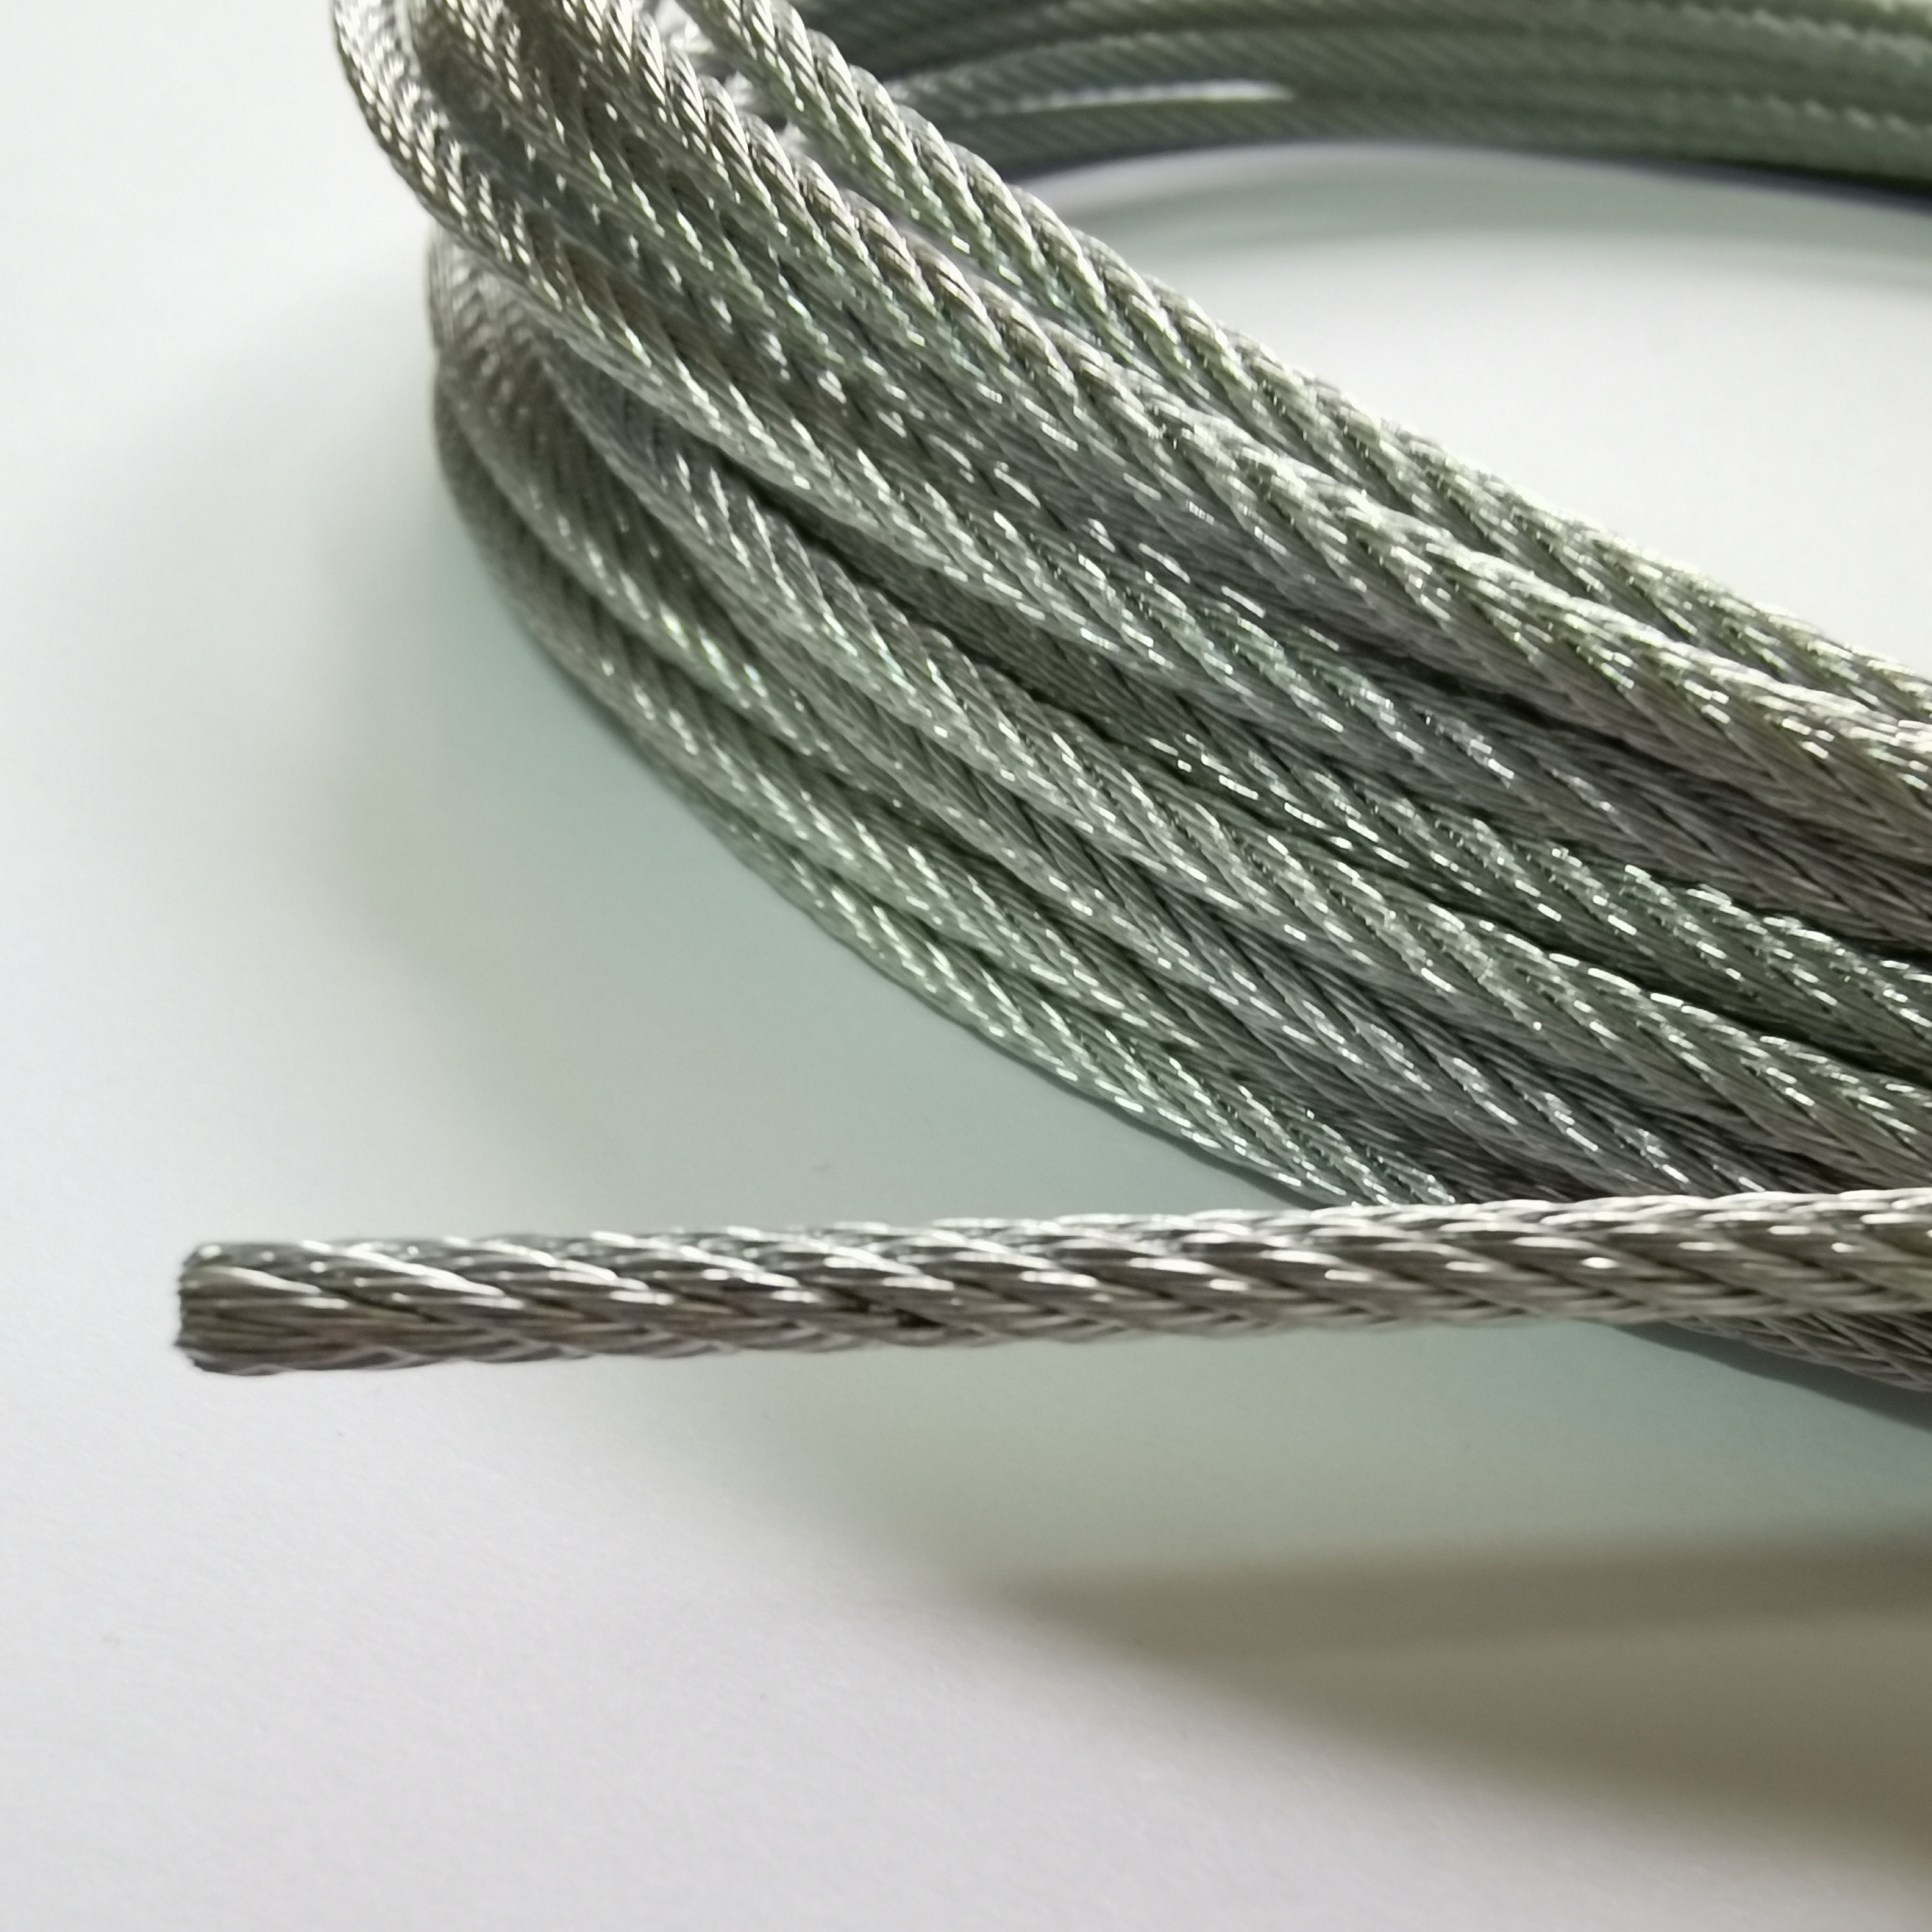 7x7 Construction Application And 2.5mm Wire Gauge Galvanized Steel Wire Rope for Painting Device And Luminaire Sling